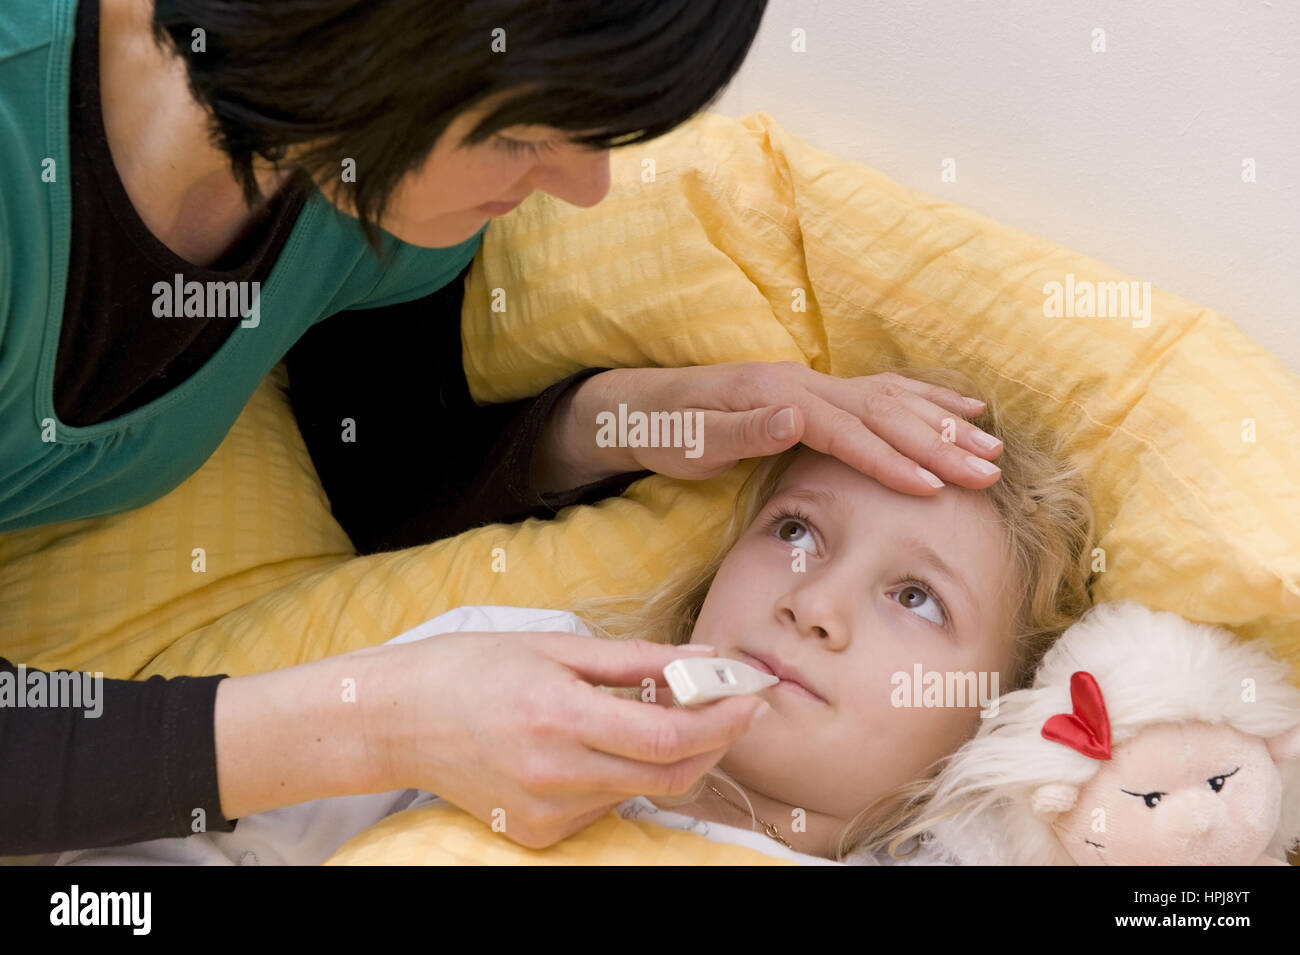 Model released , Krankes Maedchen im Bett, Mutter misst Fieber - sick girl n bed, mother with clinical thermometer Stock Photo